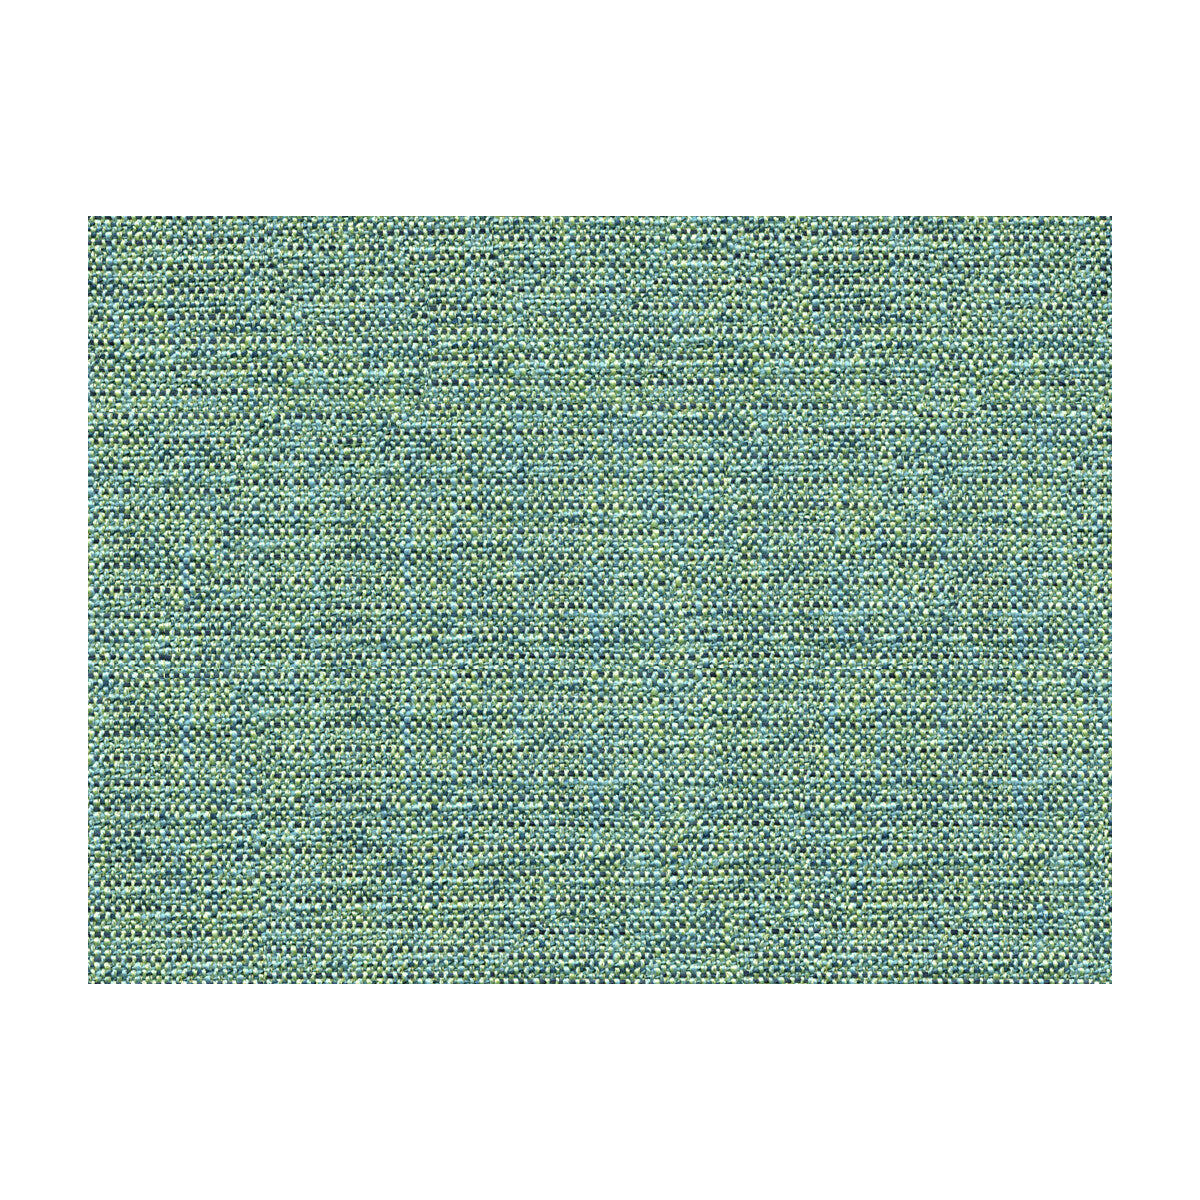 Kravet Basics fabric in 32792-515 color - pattern 32792.515.0 - by Kravet Basics in the Constantinople collection